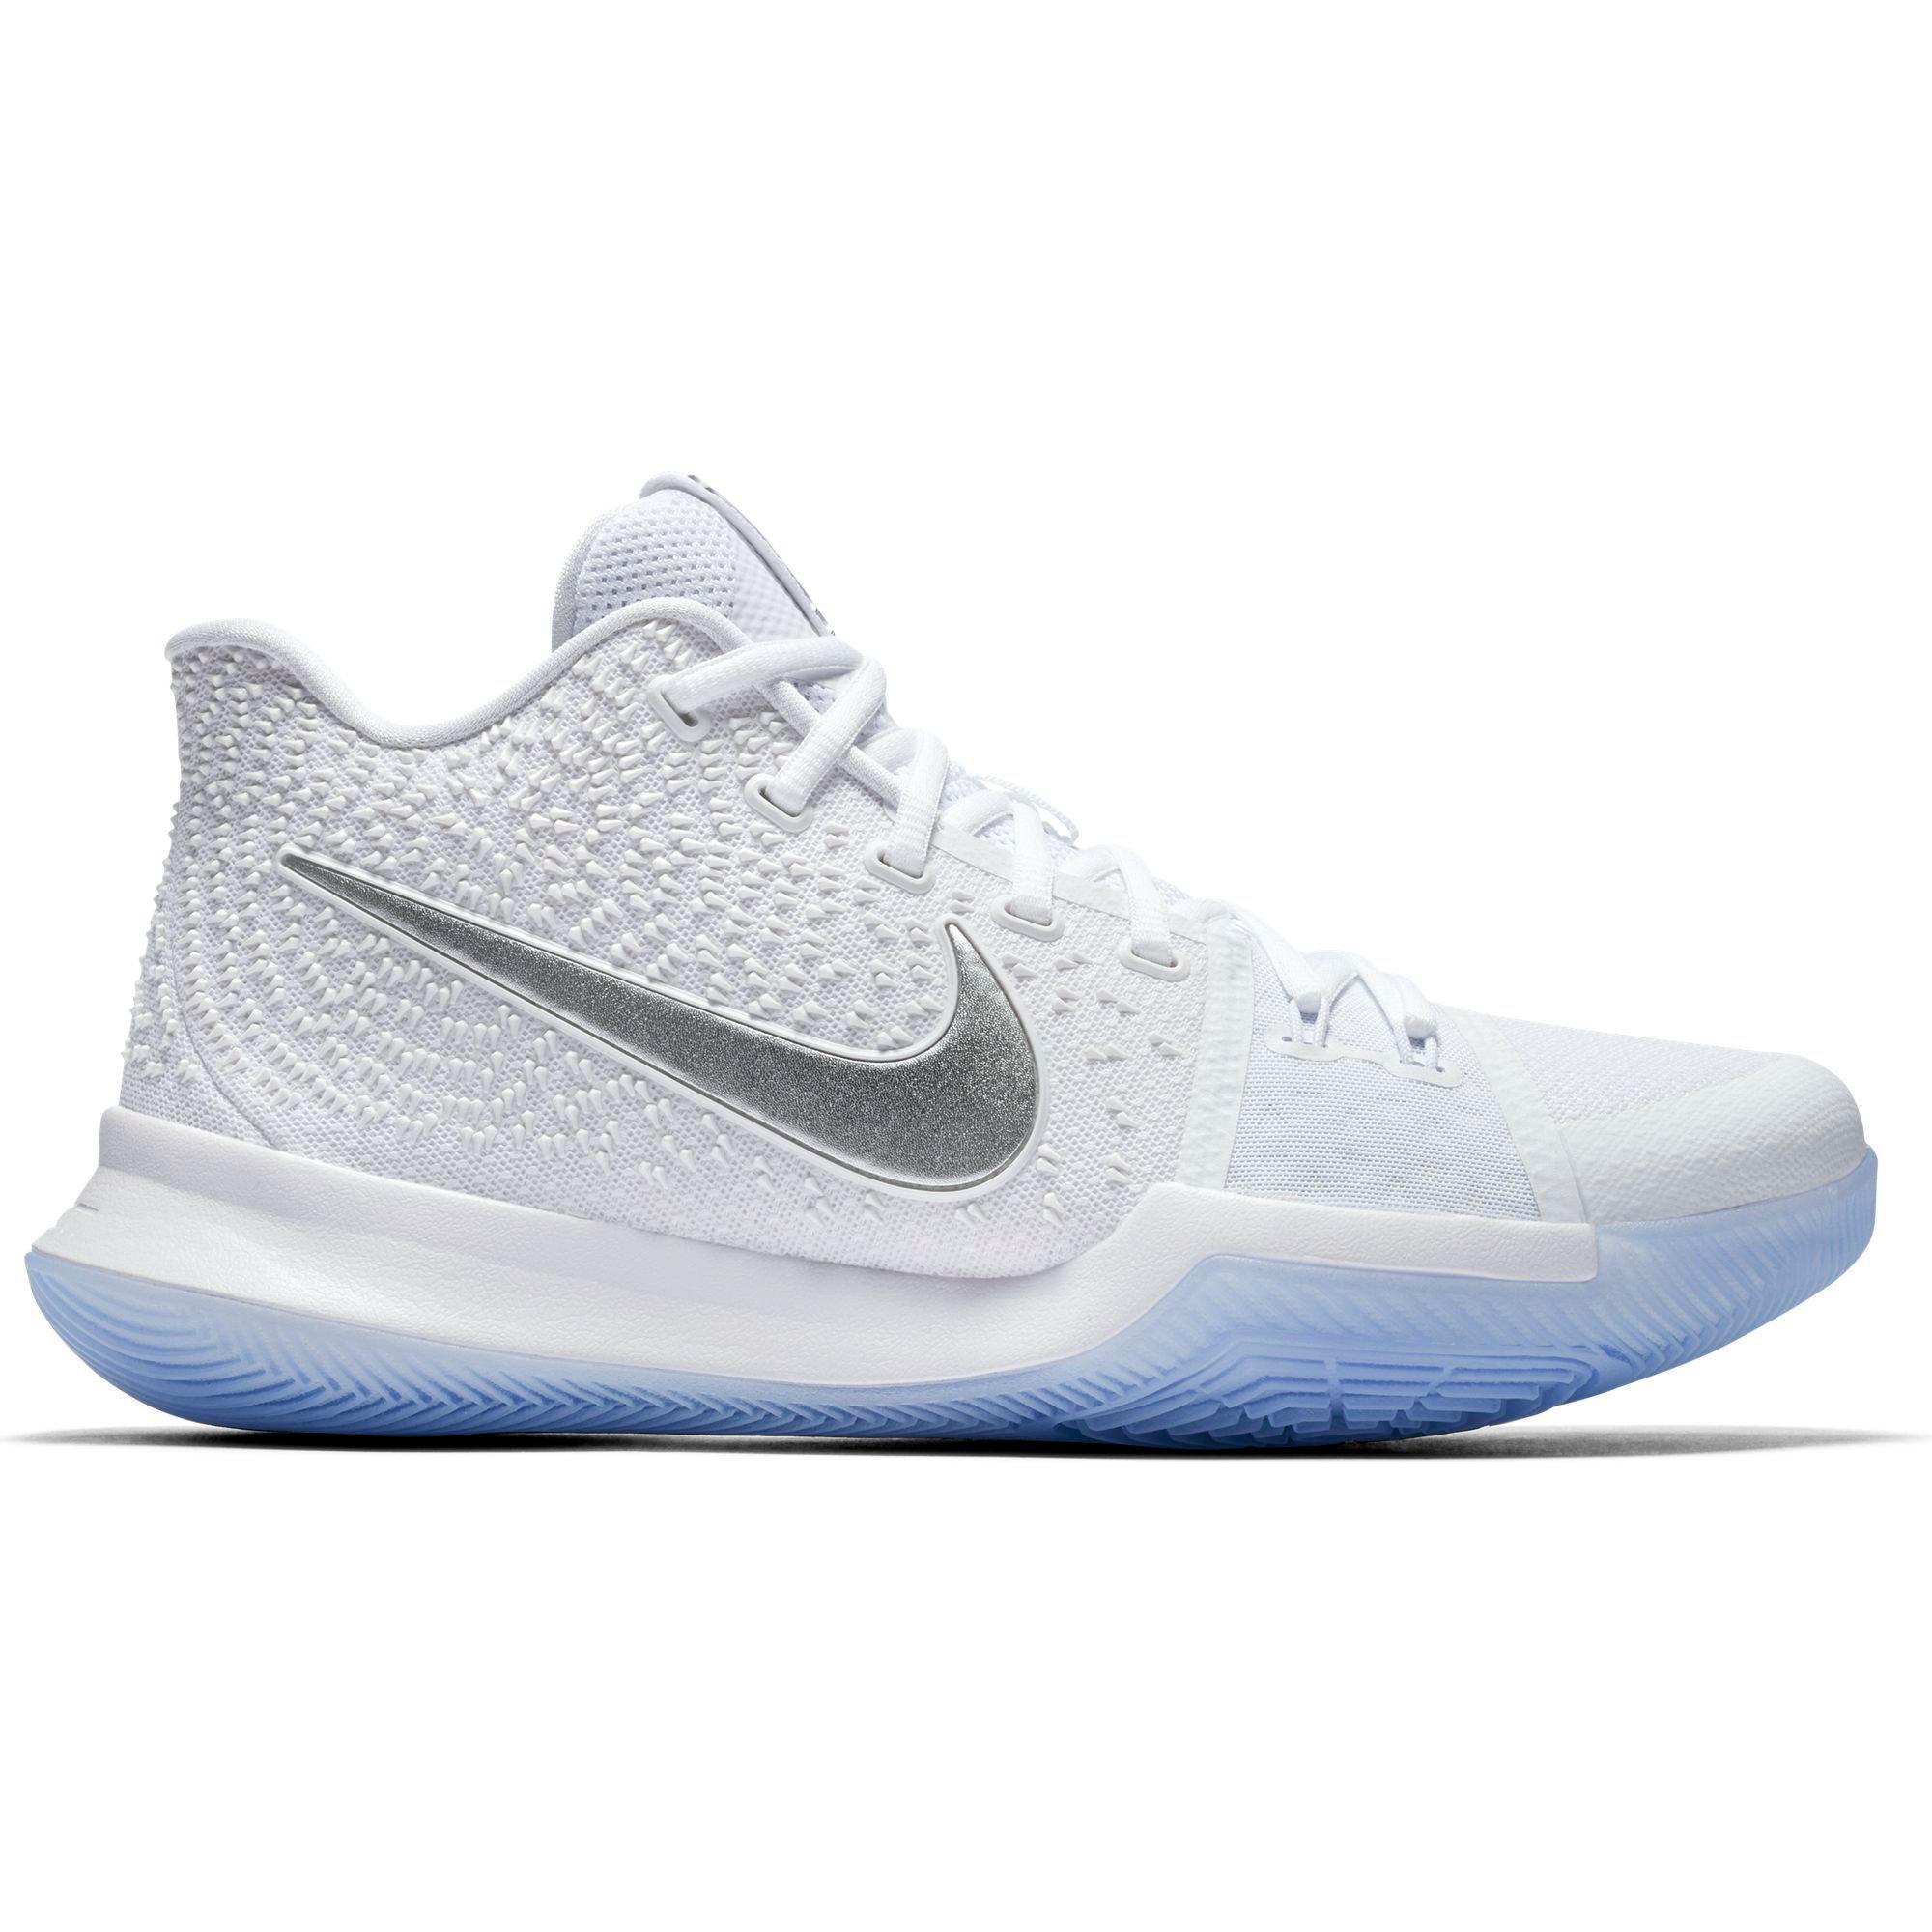 kyrie white basketball shoes